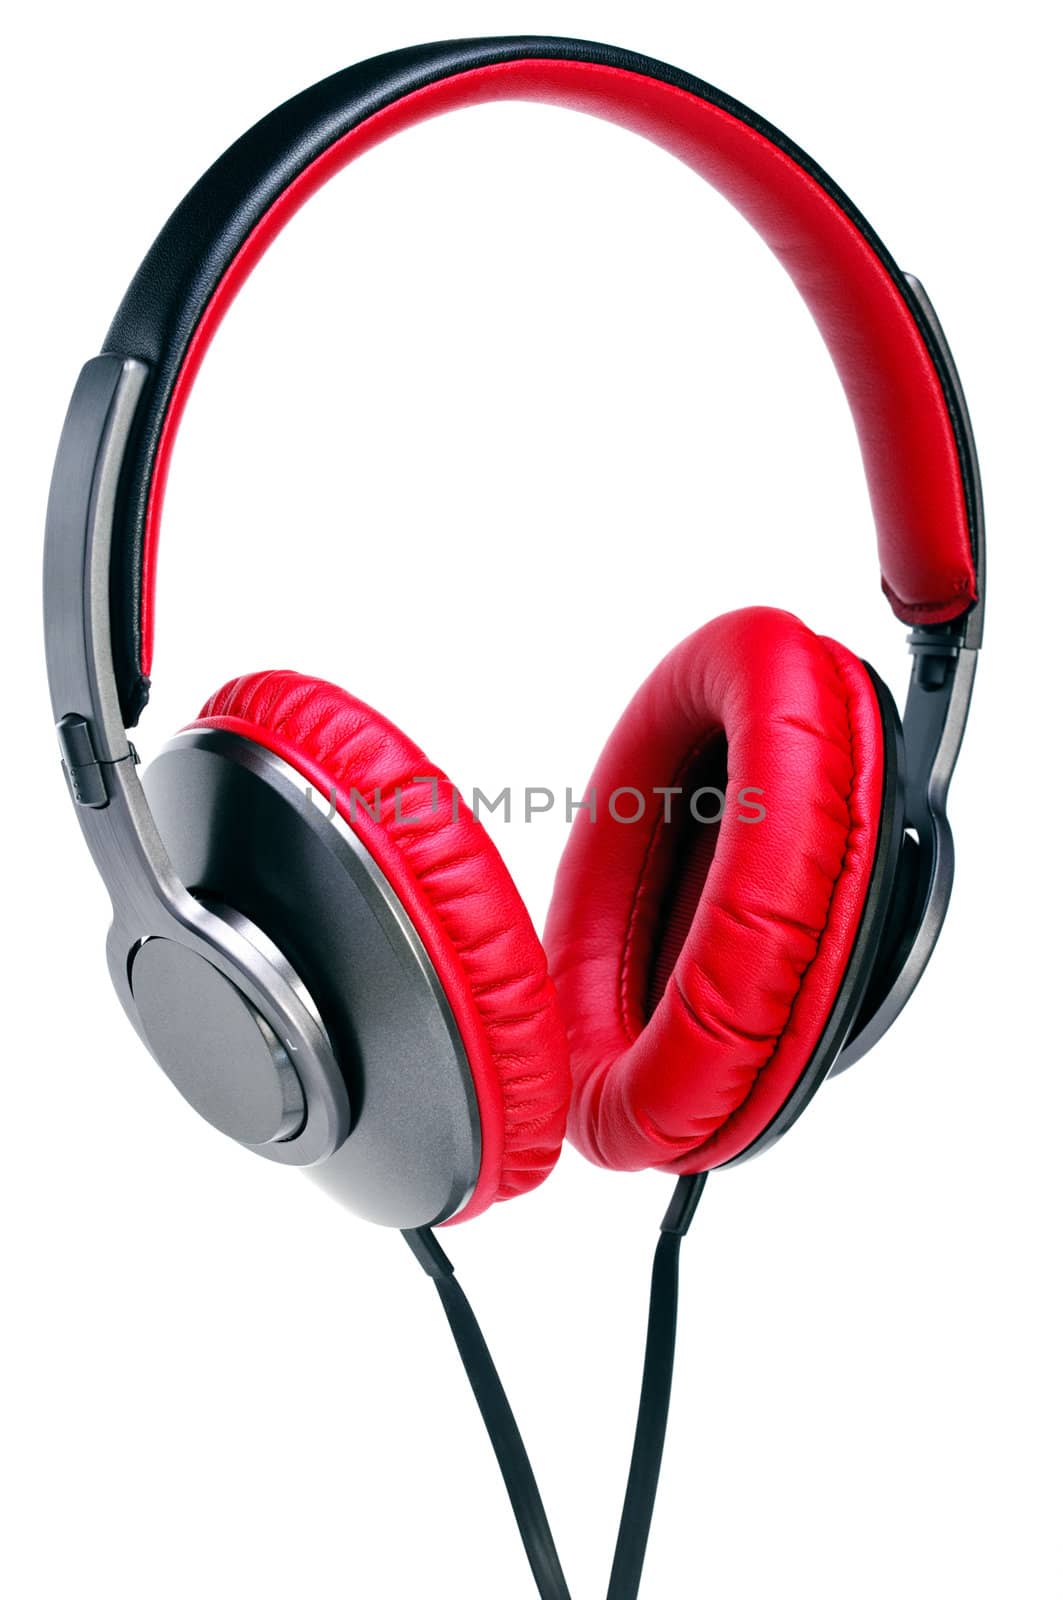 Fashion headphones made of red leather on a white background.